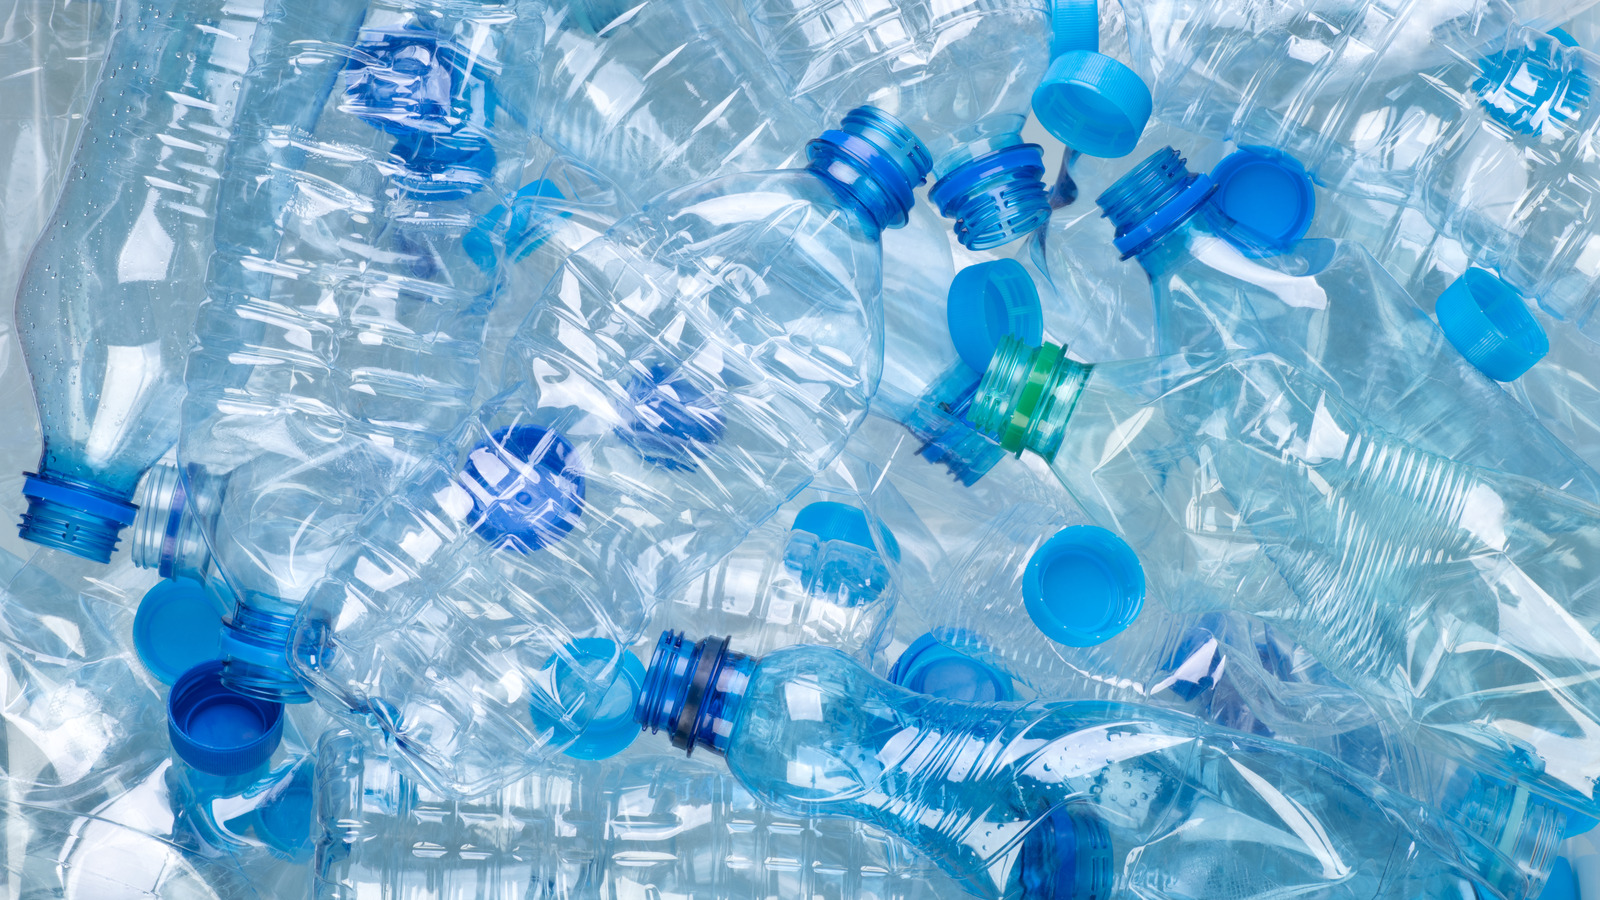 https://www.tastingtable.com/img/gallery/why-its-a-bad-idea-to-reuse-plastic-single-use-water-bottles/l-intro-1655224259.jpg